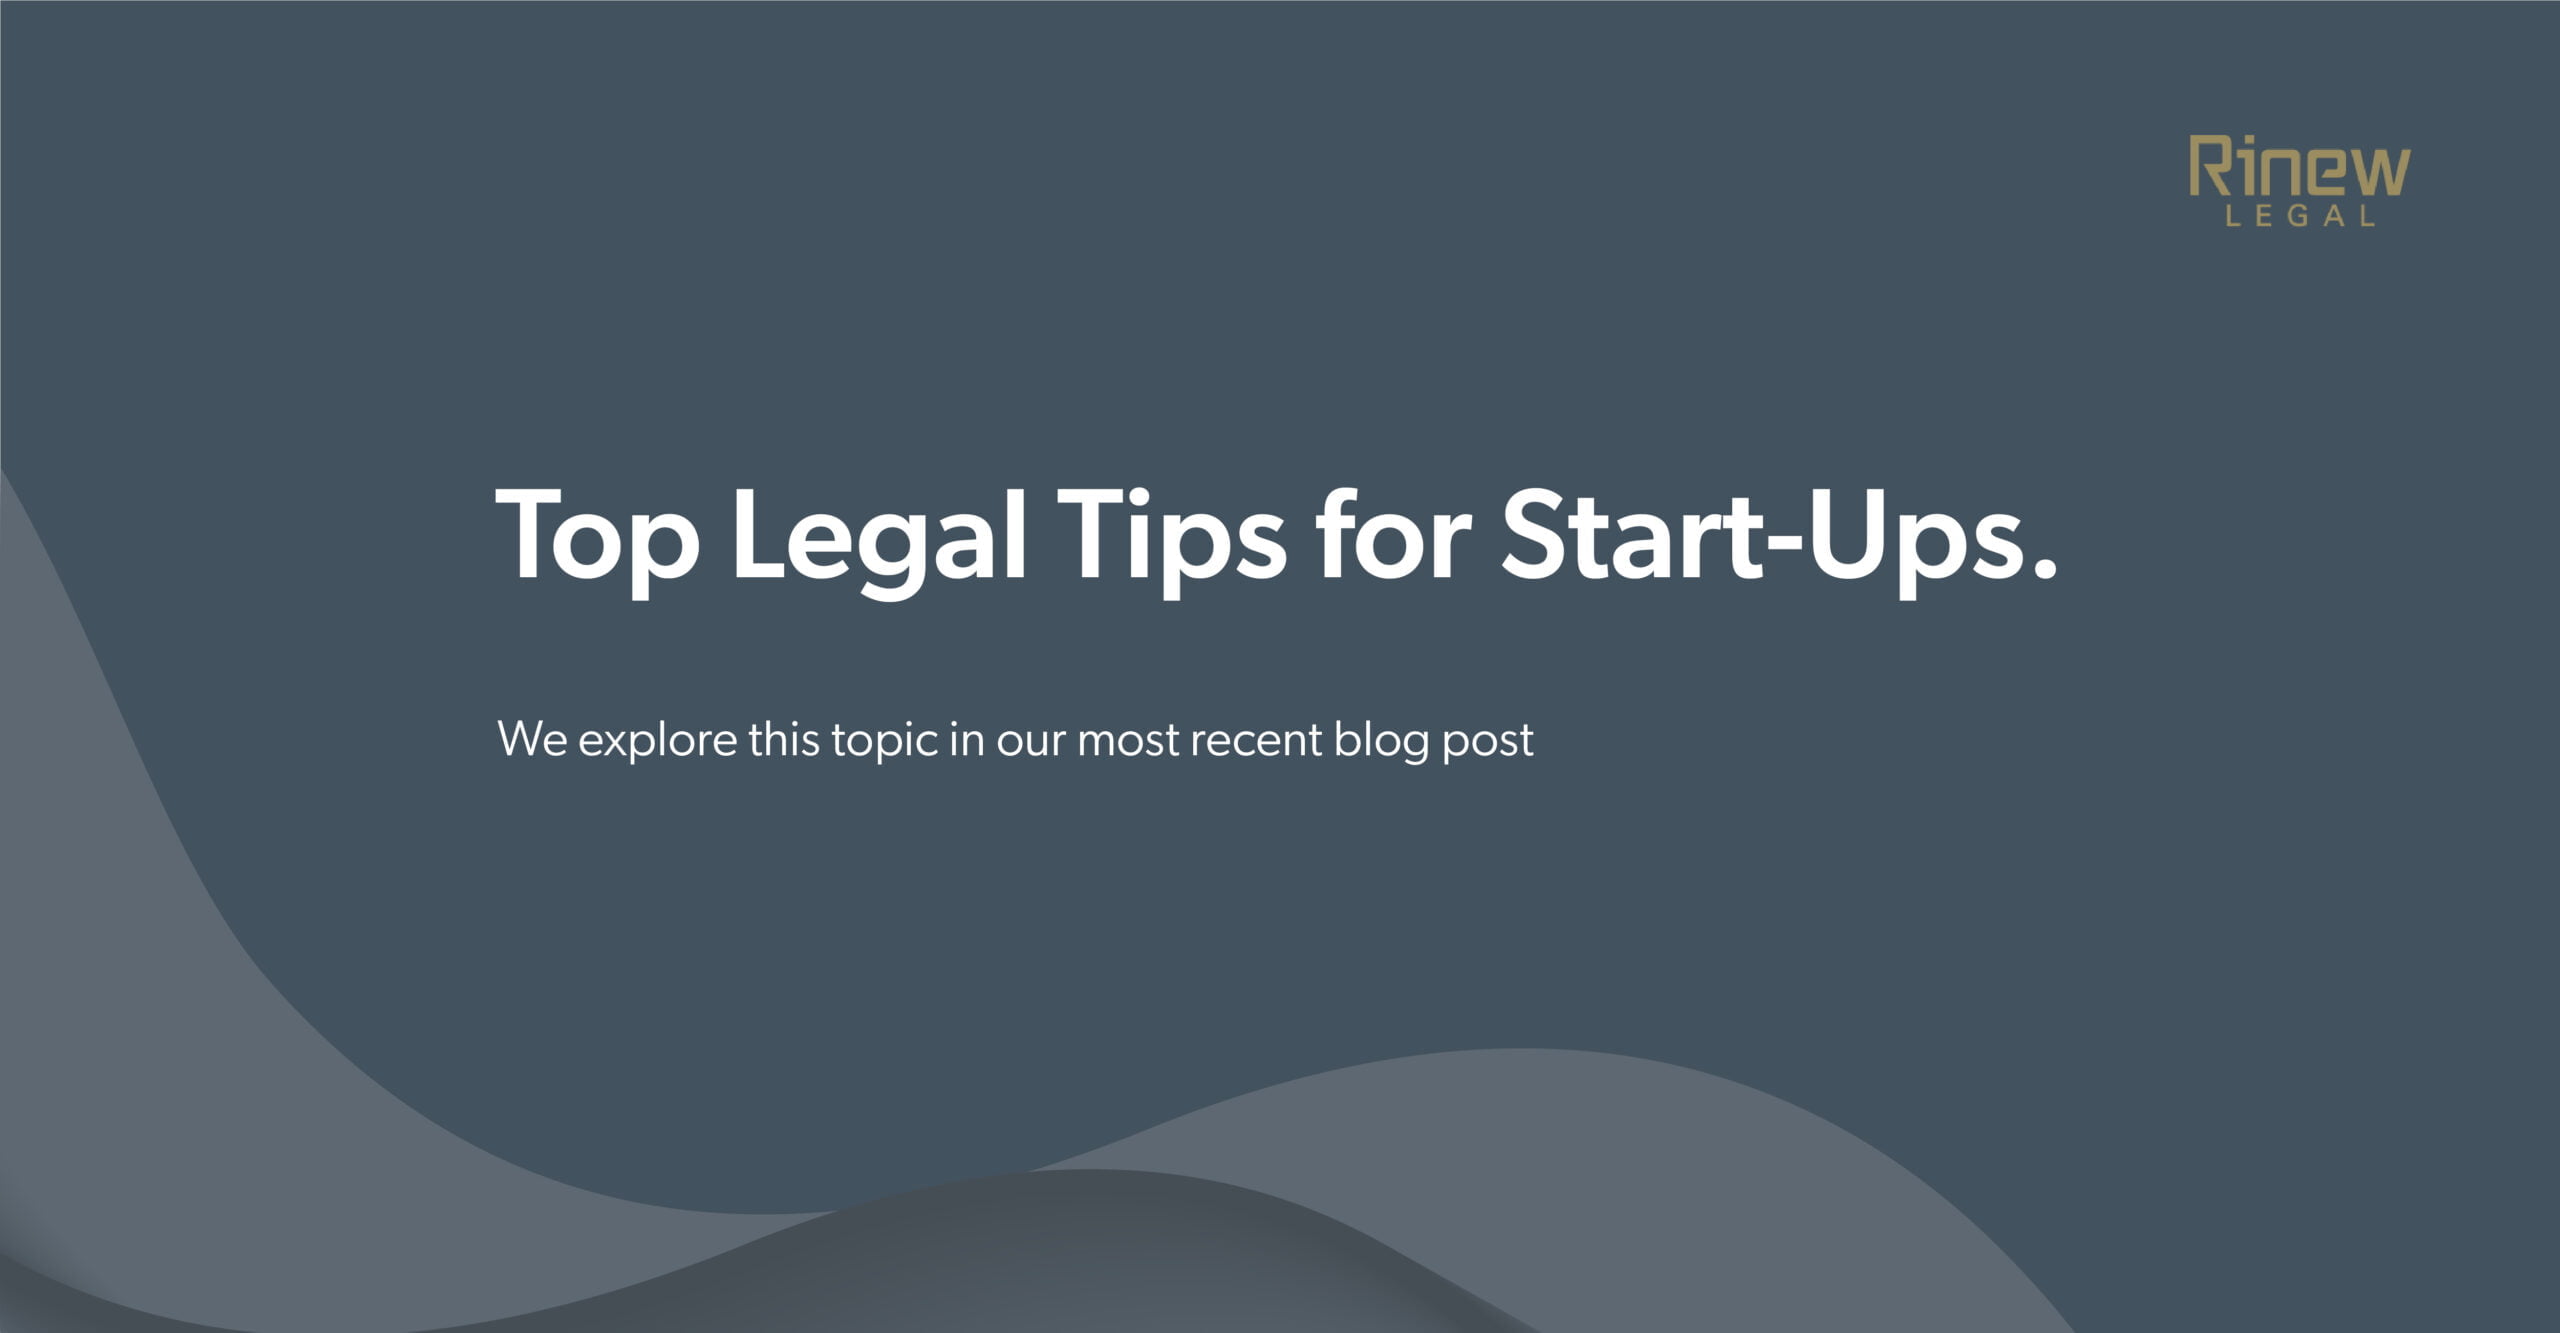 Featured image for “TOP LEGAL TIPS FOR START-UPS”